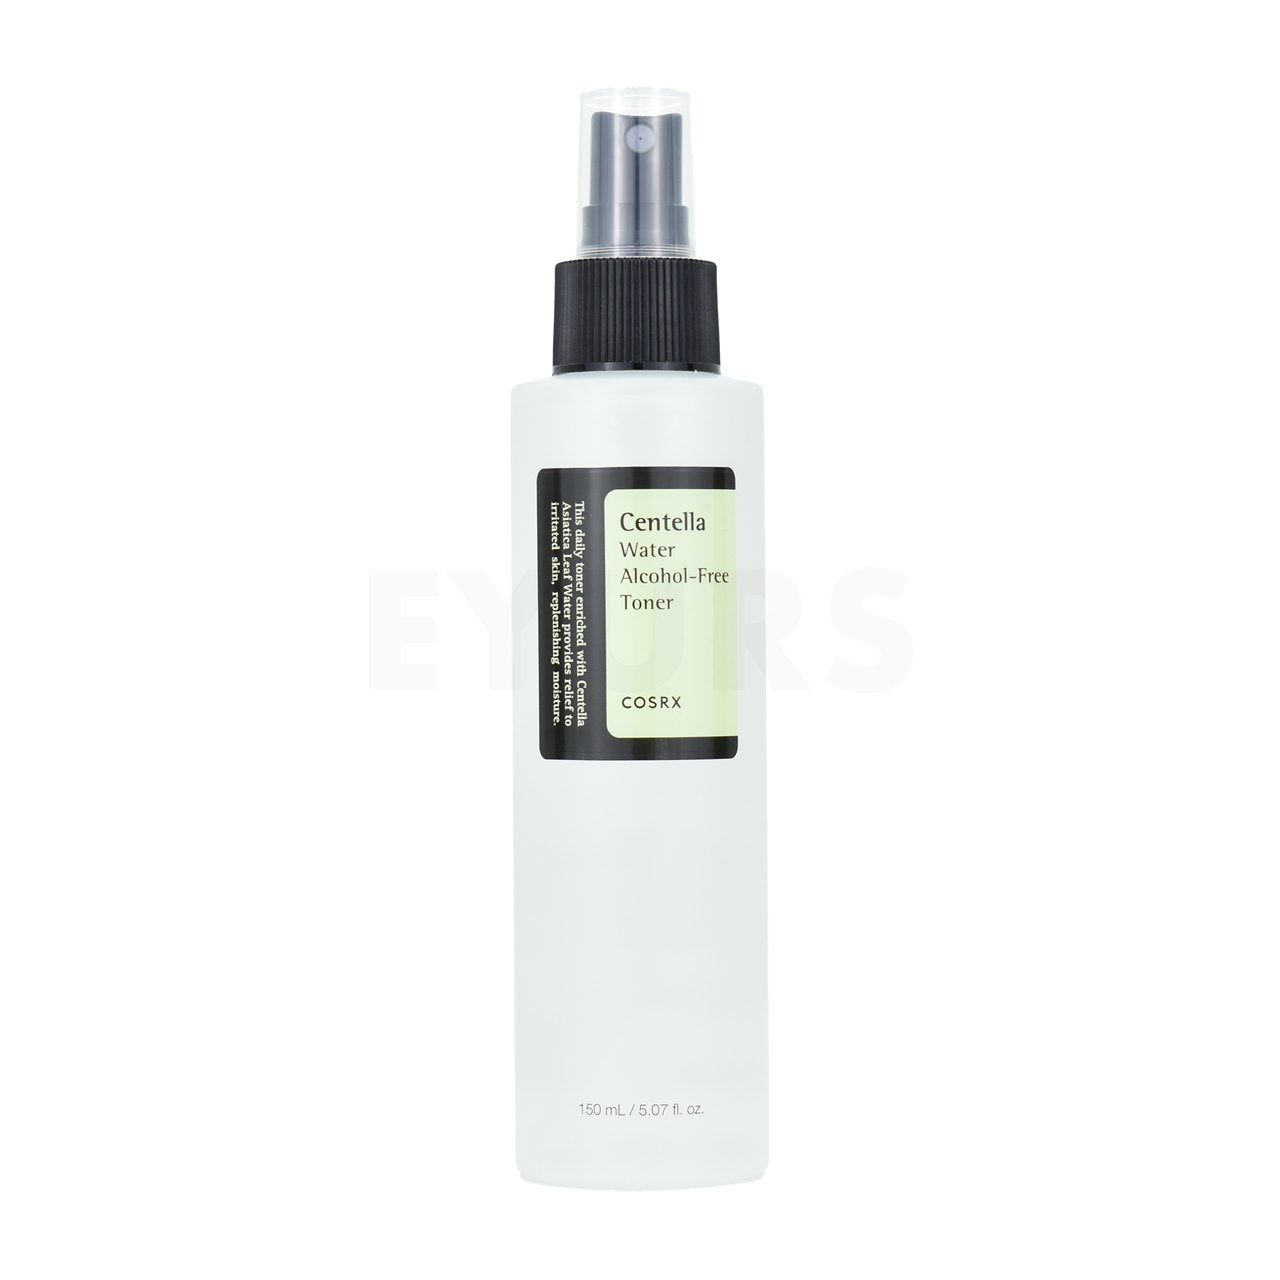 toner for sensitive skin cosrx centella water alcohol free toner front of product